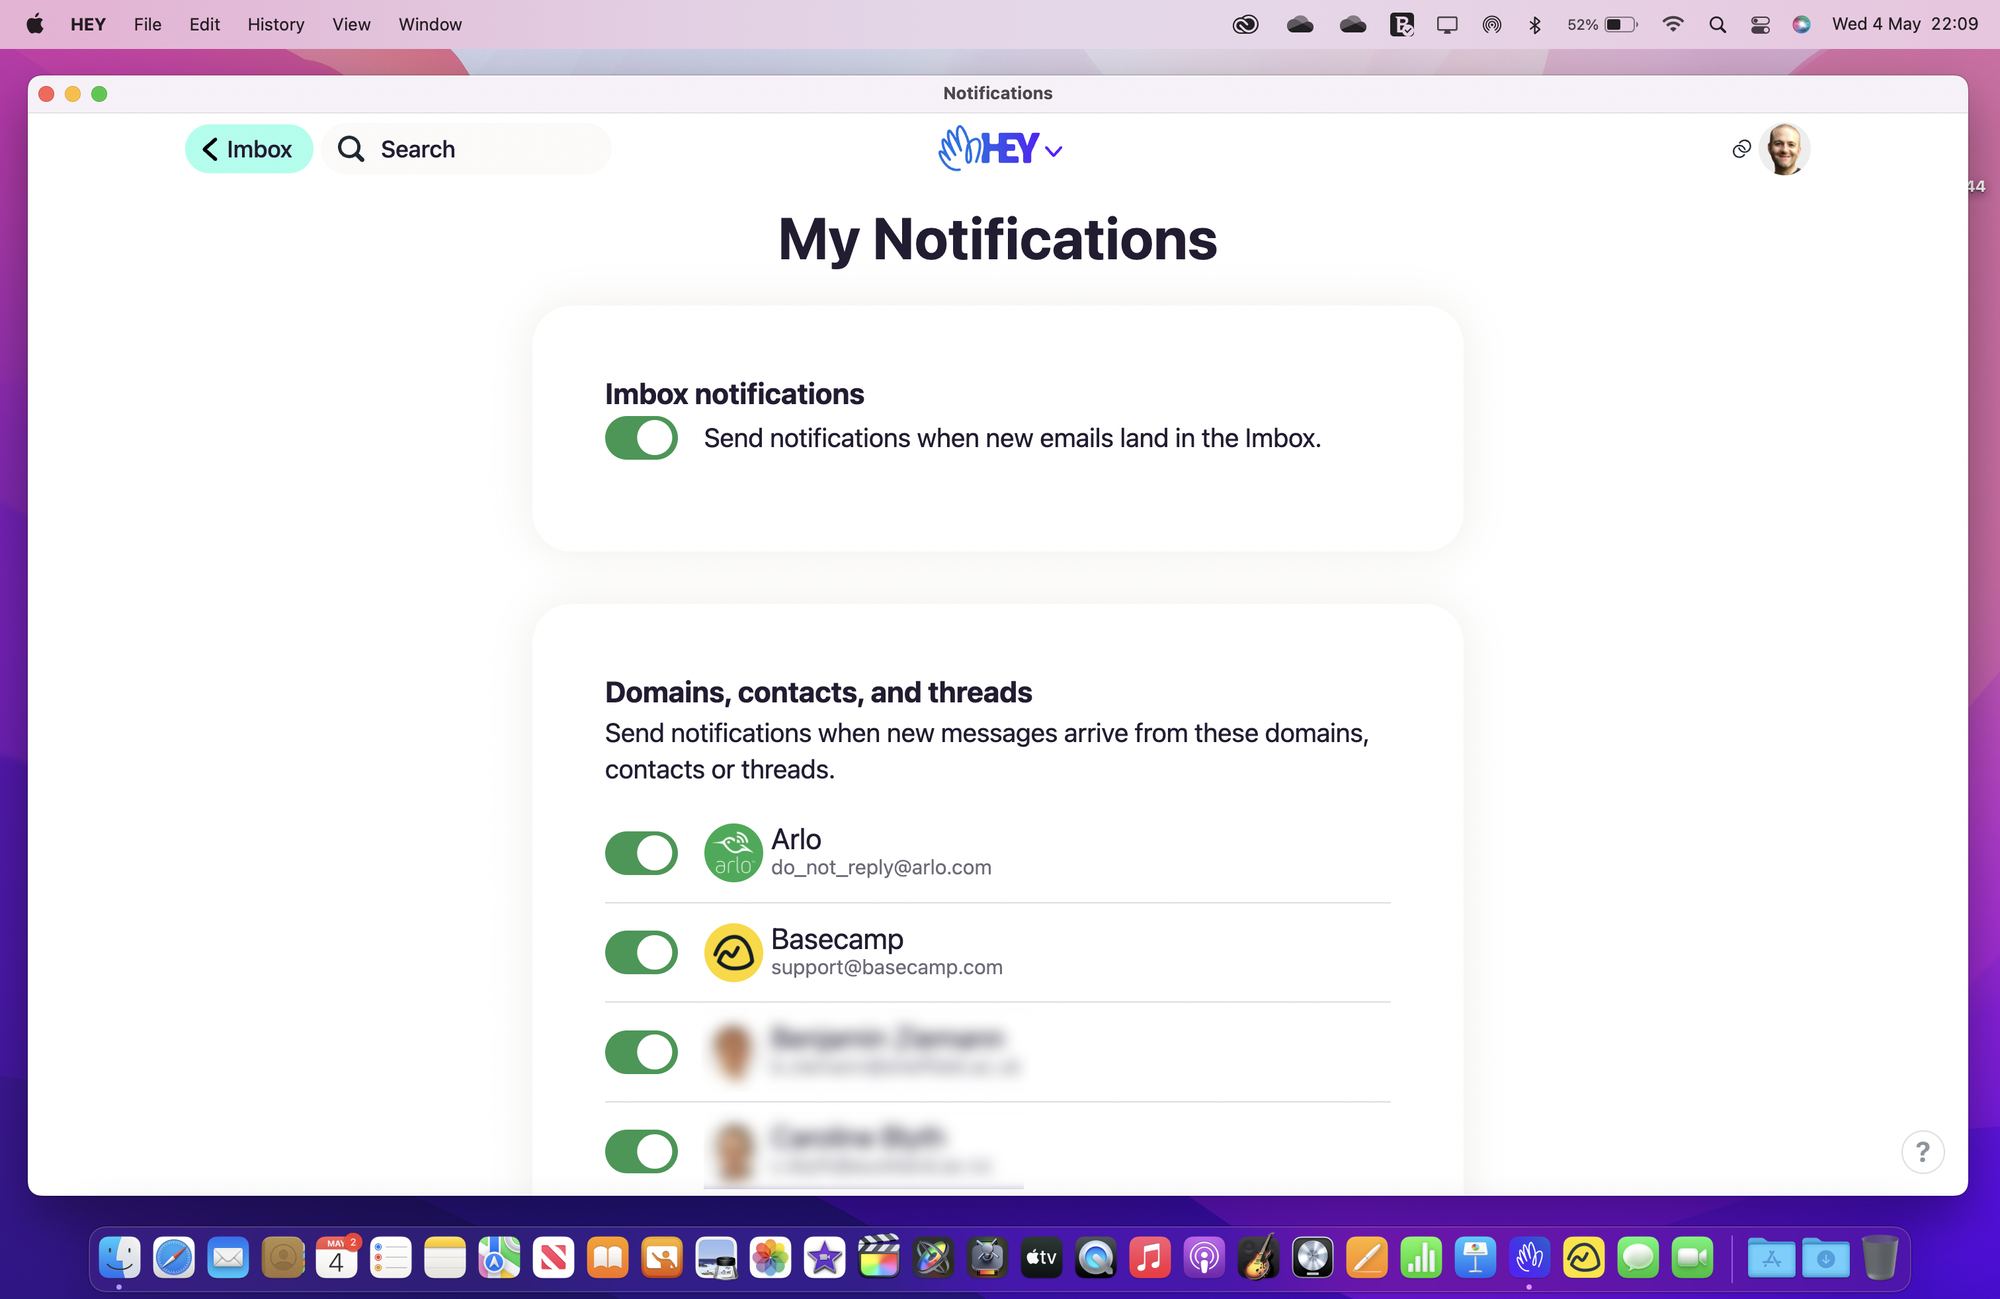 The Imbox notifications toggle for enabling notifications when emails enter the Imbox.